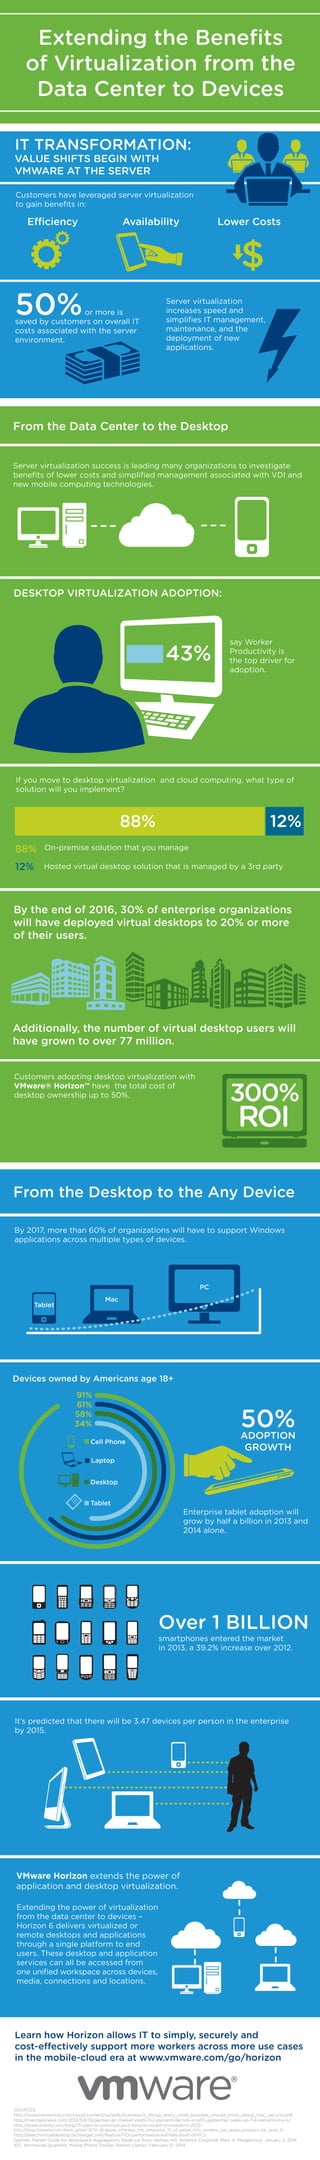 Additionally, the number of virtual desktop users will
have grown to over 77 million.
300%
ROI
Extending the Beneﬁts
of Virtualization from the
Data Center to Devices
Customers have leveraged server virtualization
to gain beneﬁts in:
Efficiency Availability Lower Costs
50%or more is
saved by customers on overall IT
costs associated with the server
environment.
Server virtualization
increases speed and
simpliﬁes IT management,
maintenance, and the
deployment of new
applications.
IT TRANSFORMATION:
VALUE SHIFTS BEGIN WITH
VMWARE AT THE SERVER
From the Data Center to the Desktop
From the Desktop to the Any Device
SOURCES:
http://www.trendmicro.com/cloud-content/us/pdfs/business/5_things_every_small_business_should_know_about_mac_security.pdf
http://macdailynews.com/2013/04/10/gartner-pc-market-posts-11-2-percent-decline-in-q113-apple-mac-sales-up-7-4-percent-in-u-s/
http://www.mobify.com/blog/13-stats-to-convince-your-boss-to-invest-in-mobile-in-2013/
http://blogs.forrester.com/frank_gillett/12-01-26-apple_inﬁltrates_the_enterprise_15_of_global_info_workers_use_apple_products_for_work_0
http://searchvirtualdesktop.techtarget.com/feature/VDI-performance-still-falls-short-of-PCs
Gartner, Market Guide for Workspace Aggregators, Federica Troni, Nathan Hill, Terrence Cosgrove, Mark A. Margevicius, January 2, 2014
IDC, Worldwide Quarterly Mobile Phone Tracker, Ramon Llamas, February 12, 2014
If you move to desktop virtualization and cloud computing, what type of
solution will you implement?
On-premise solution that you manage
Hosted virtual desktop solution that is managed by a 3rd party
88%
12%
88% 12%
Over 1 BILLION
smartphones entered the market
in 2013, a 39.2% increase over 2012.
VMware Horizon extends the power of
application and desktop virtualization.
Customers adopting desktop virtualization with
VMware® Horizon™ have the total cost of
desktop ownership up to 50%.
It’s predicted that there will be 3.47 devices per person in the enterprise
by 2015.
Learn how Horizon allows IT to simply, securely and
cost-effectively support more workers across more use cases
in the mobile-cloud era at www.vmware.com/go/horizon
Server virtualization success is leading many organizations to investigate
beneﬁts of lower costs and simpliﬁed management associated with VDI and
new mobile computing technologies.
DESKTOP VIRTUALIZATION ADOPTION:
43%
say Worker
Productivity is
the top driver for
adoption.
By the end of 2016, 30% of enterprise organizations
will have deployed virtual desktops to 20% or more
of their users.
Cell Phone
Desktop
Laptop
Tablet
91%
61%
58%
34%
Devices owned by Americans age 18+
Enterprise tablet adoption will
grow by half a billion in 2013 and
2014 alone.
Extending the power of virtualization
from the data center to devices –
Horizon 6 delivers virtualized or
remote desktops and applications
through a single platform to end
users. These desktop and application
services can all be accessed from
one uniﬁed workspace across devices,
media, connections and locations.
By 2017, more than 60% of organizations will have to support Windows
applications across multiple types of devices.
Tablet
Mac
PC
 